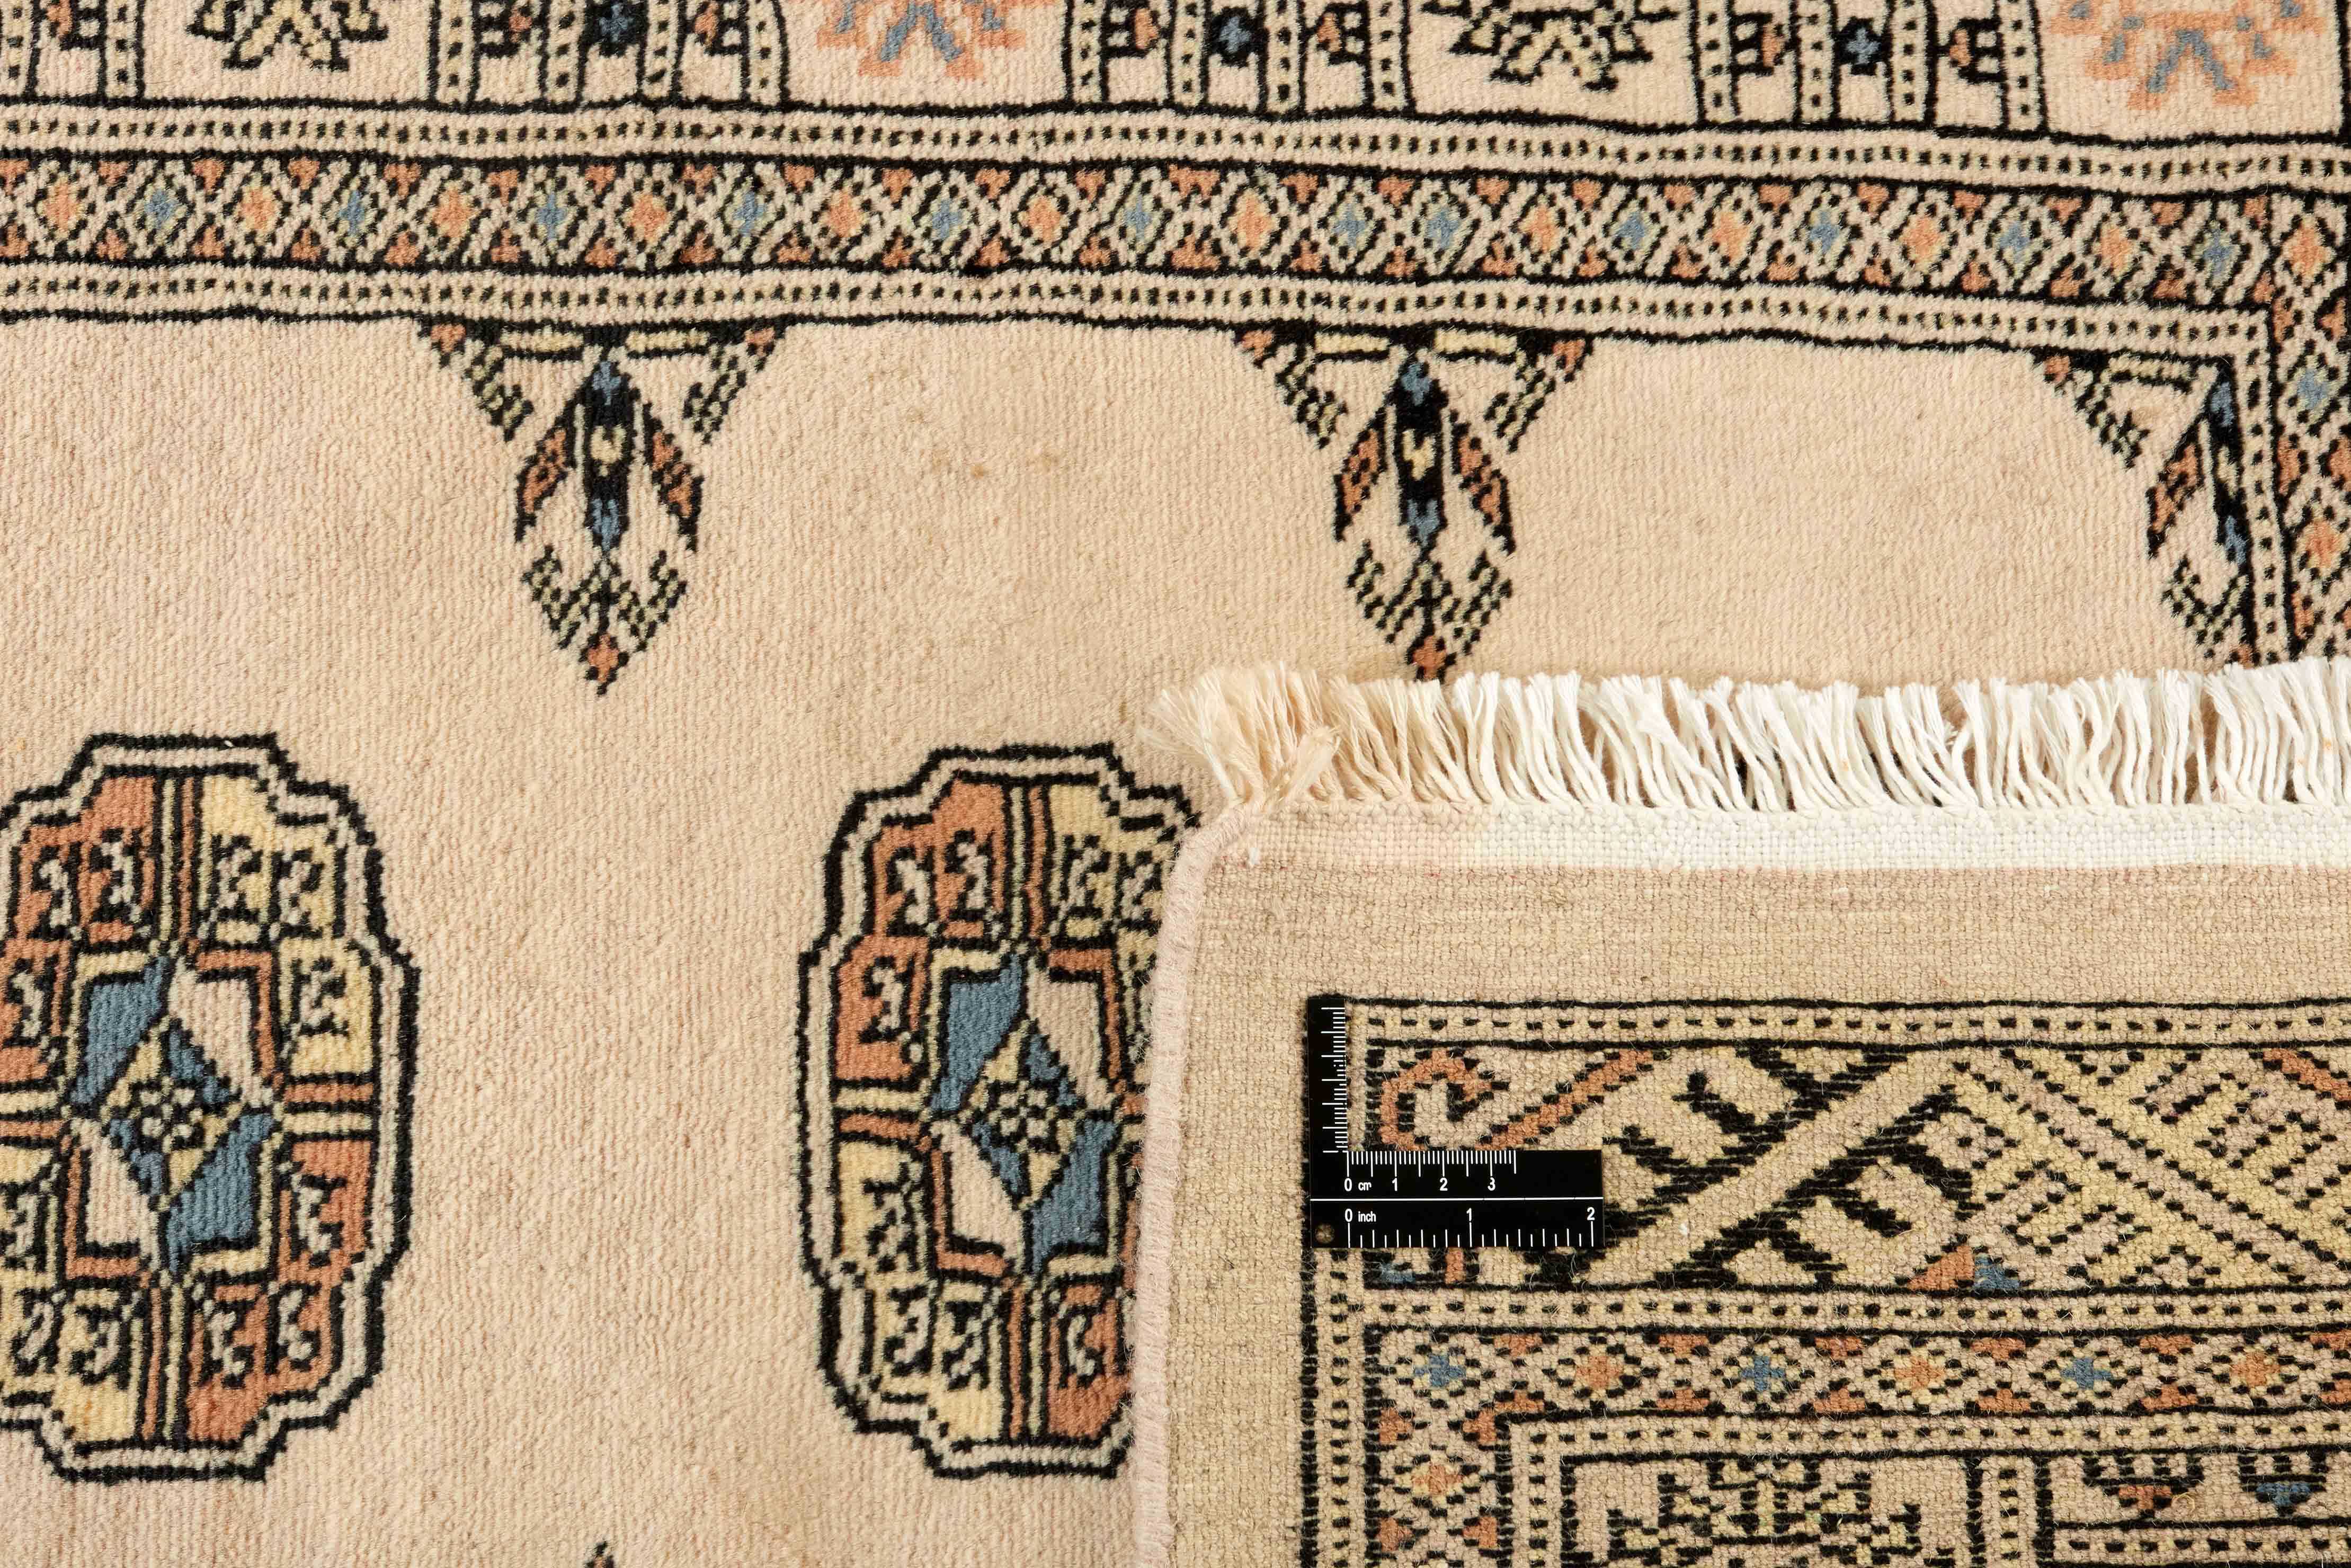 beige oriental runner with traditional gul pattern